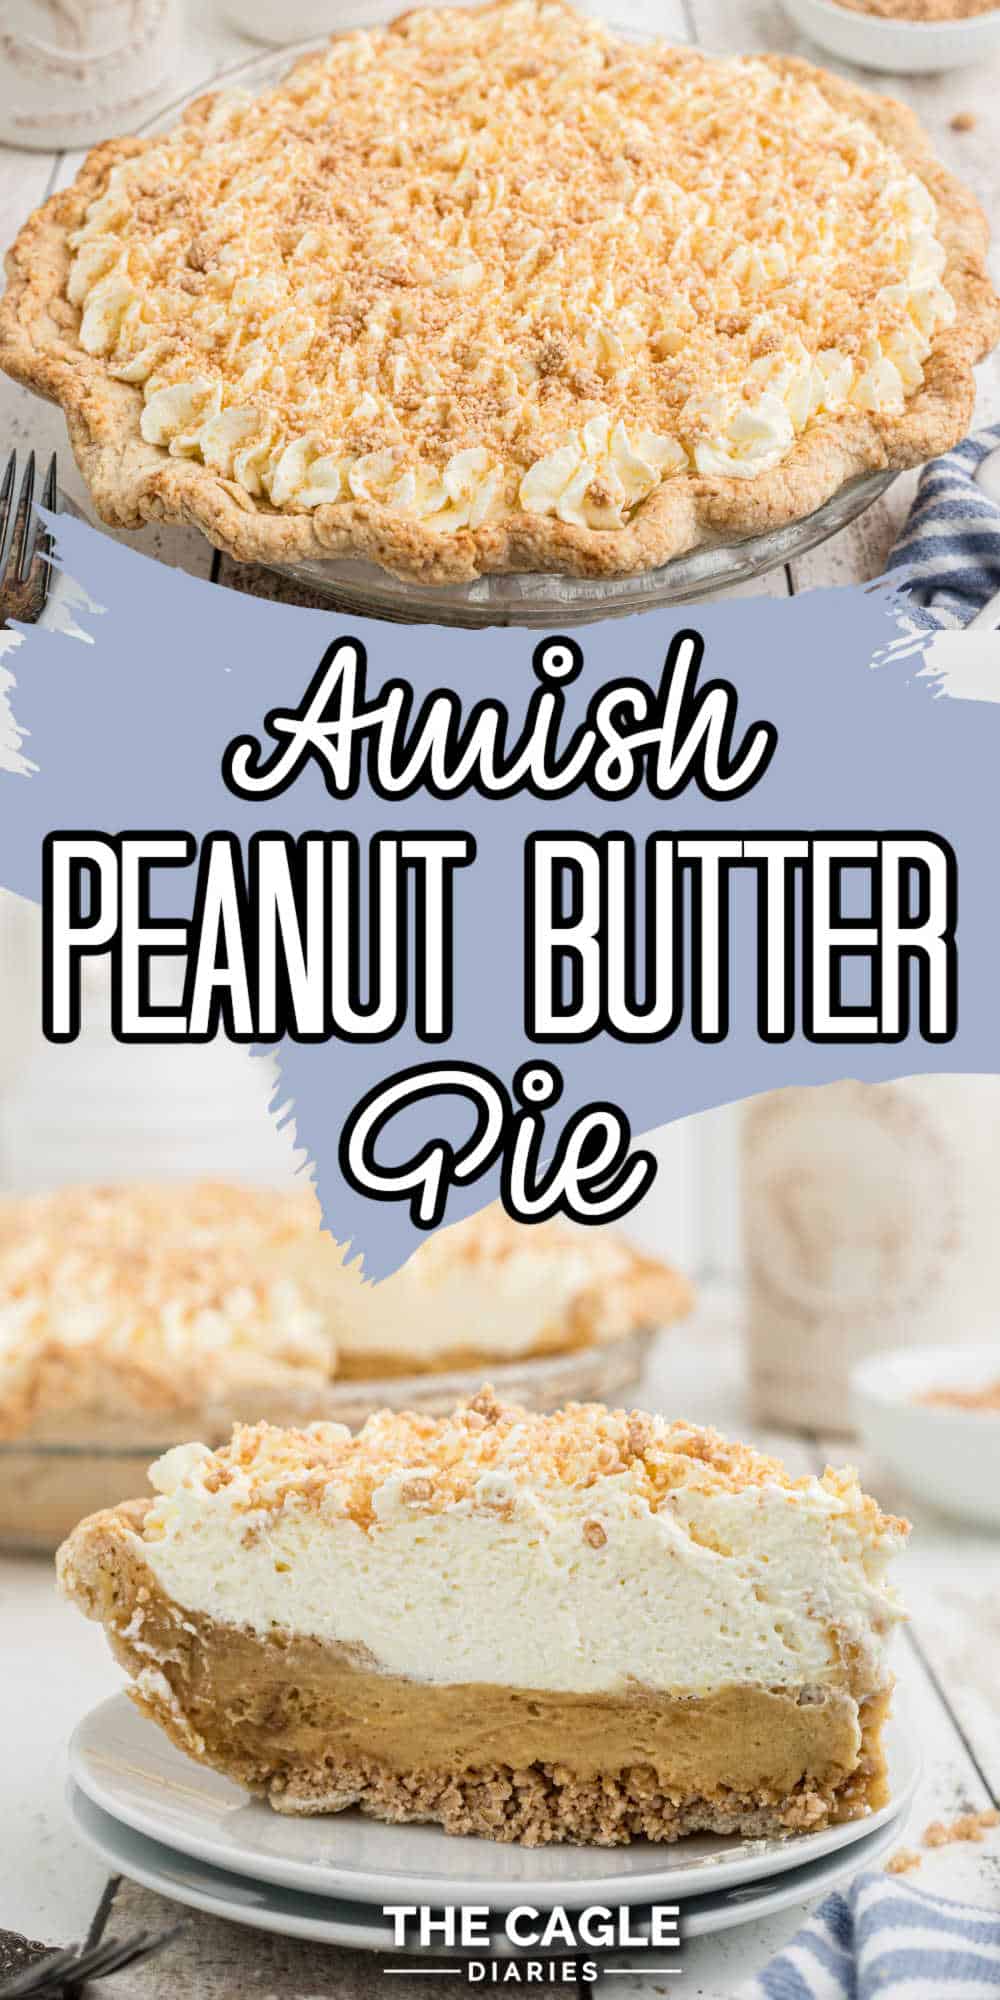 A long collage with two images showing Amish peanut butter pie, the first image is of the whole pie. The second image is of just a slice of that pie.